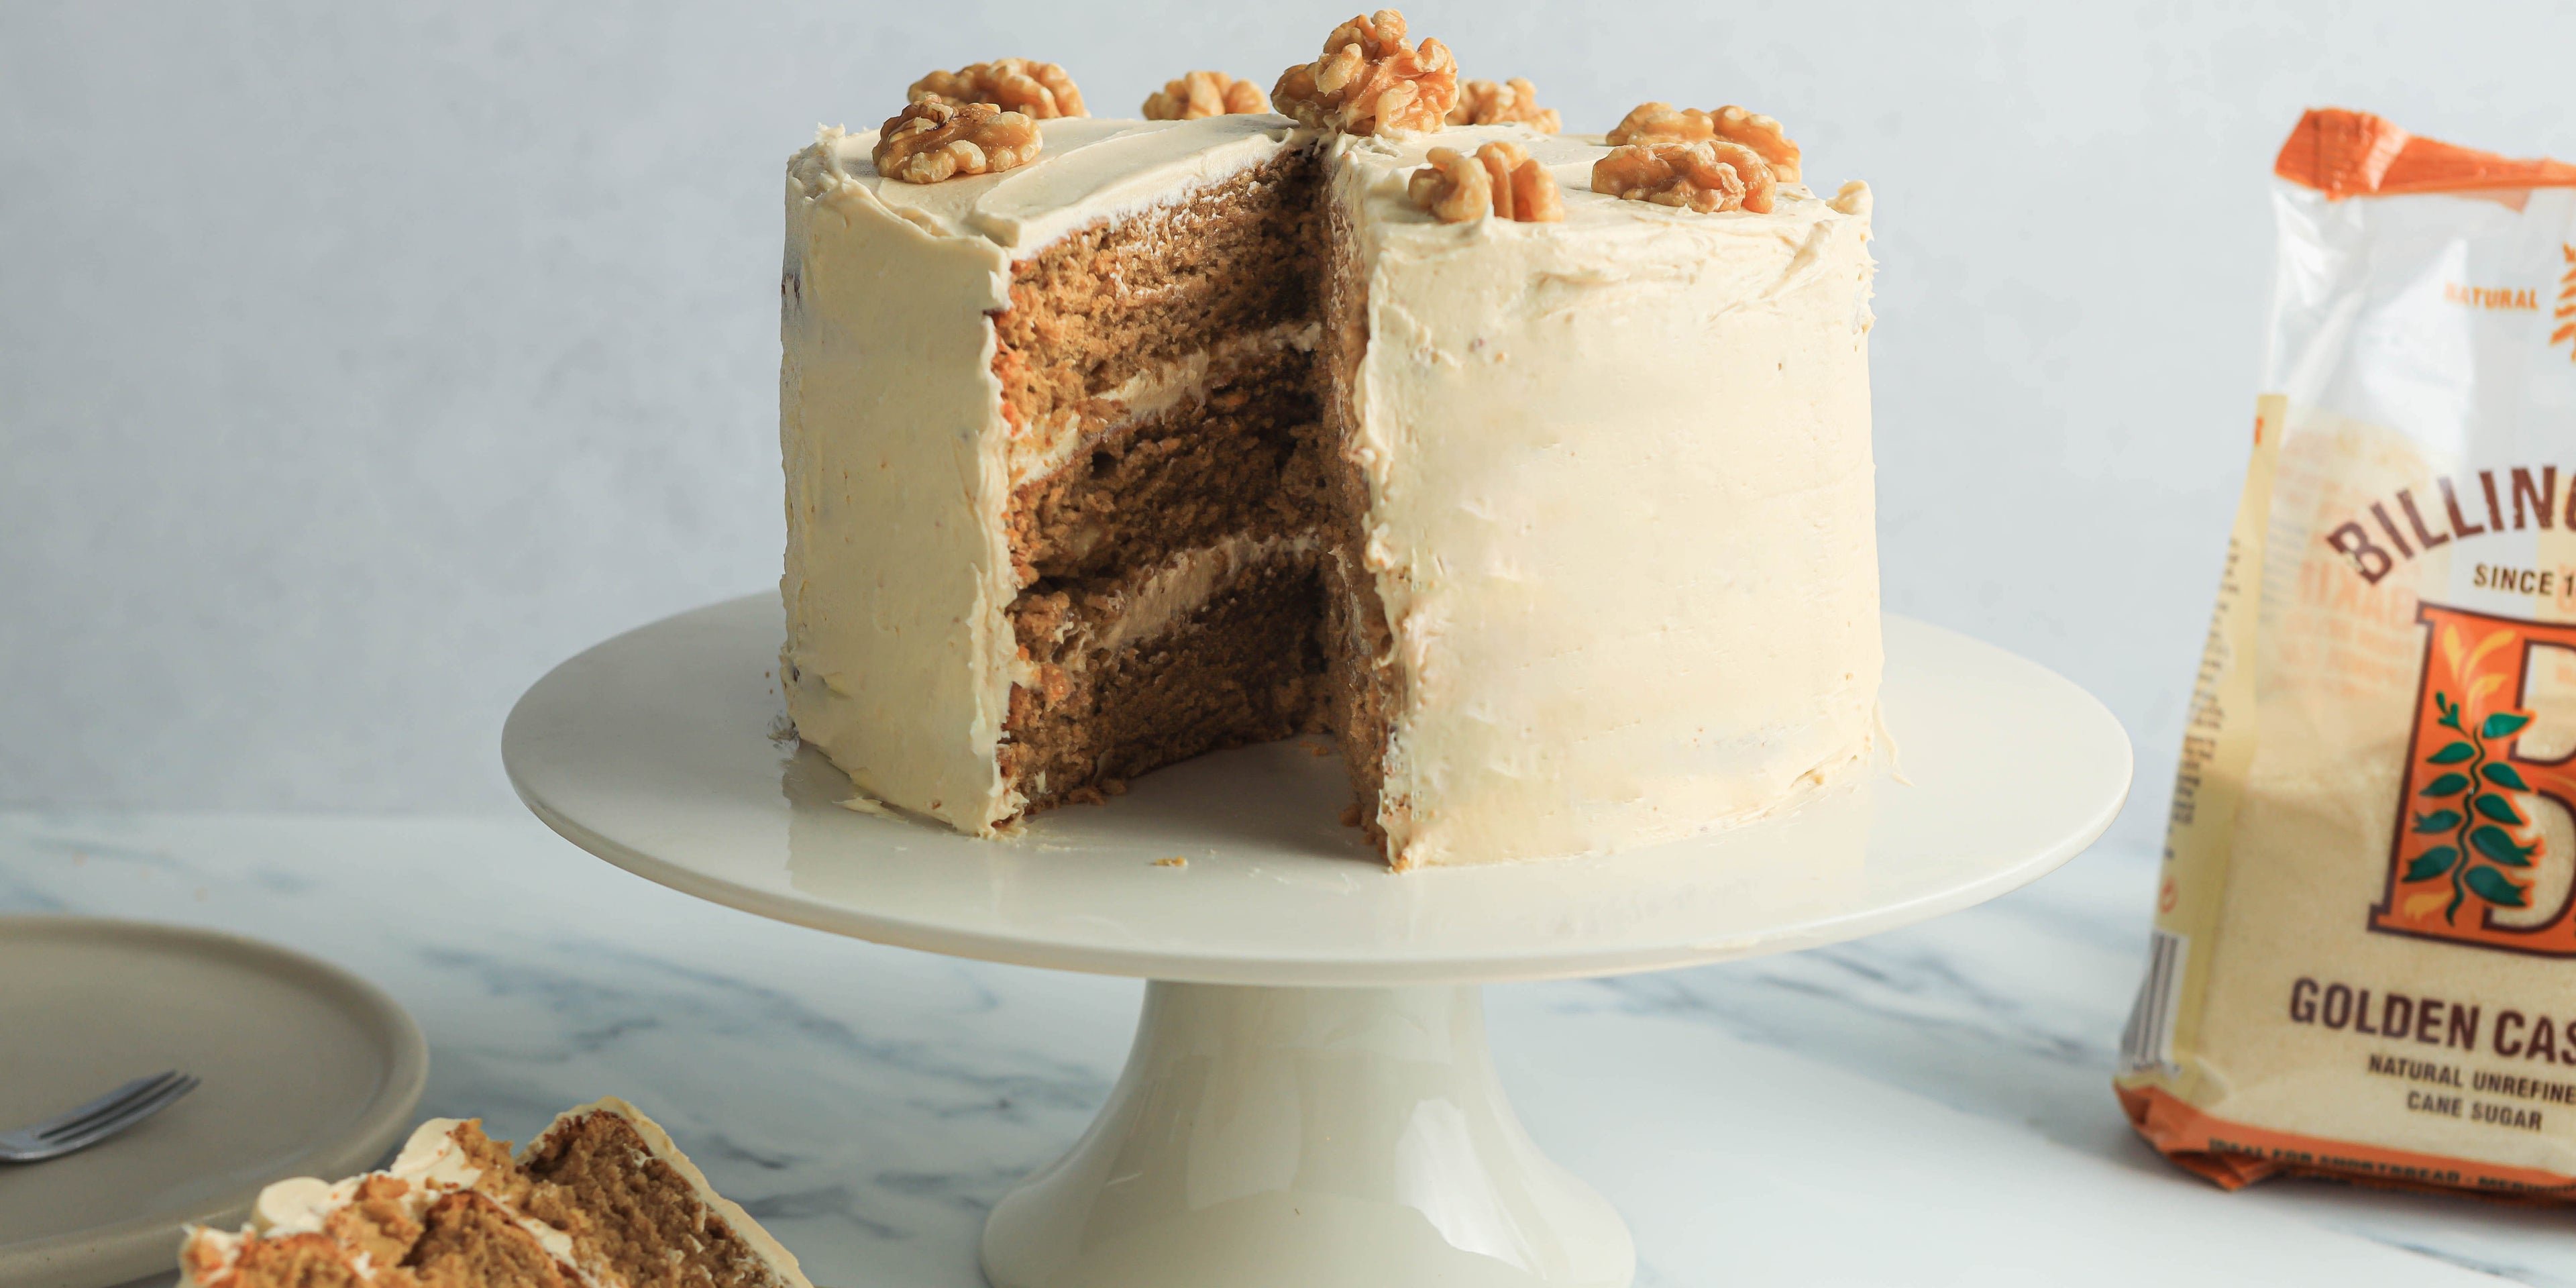 Coffee and Walnut cake covered in buttercream and topped with walnuts on a white cake stand with a slice removed from it showing the layers inside. A pack of golden caster sugar next to it